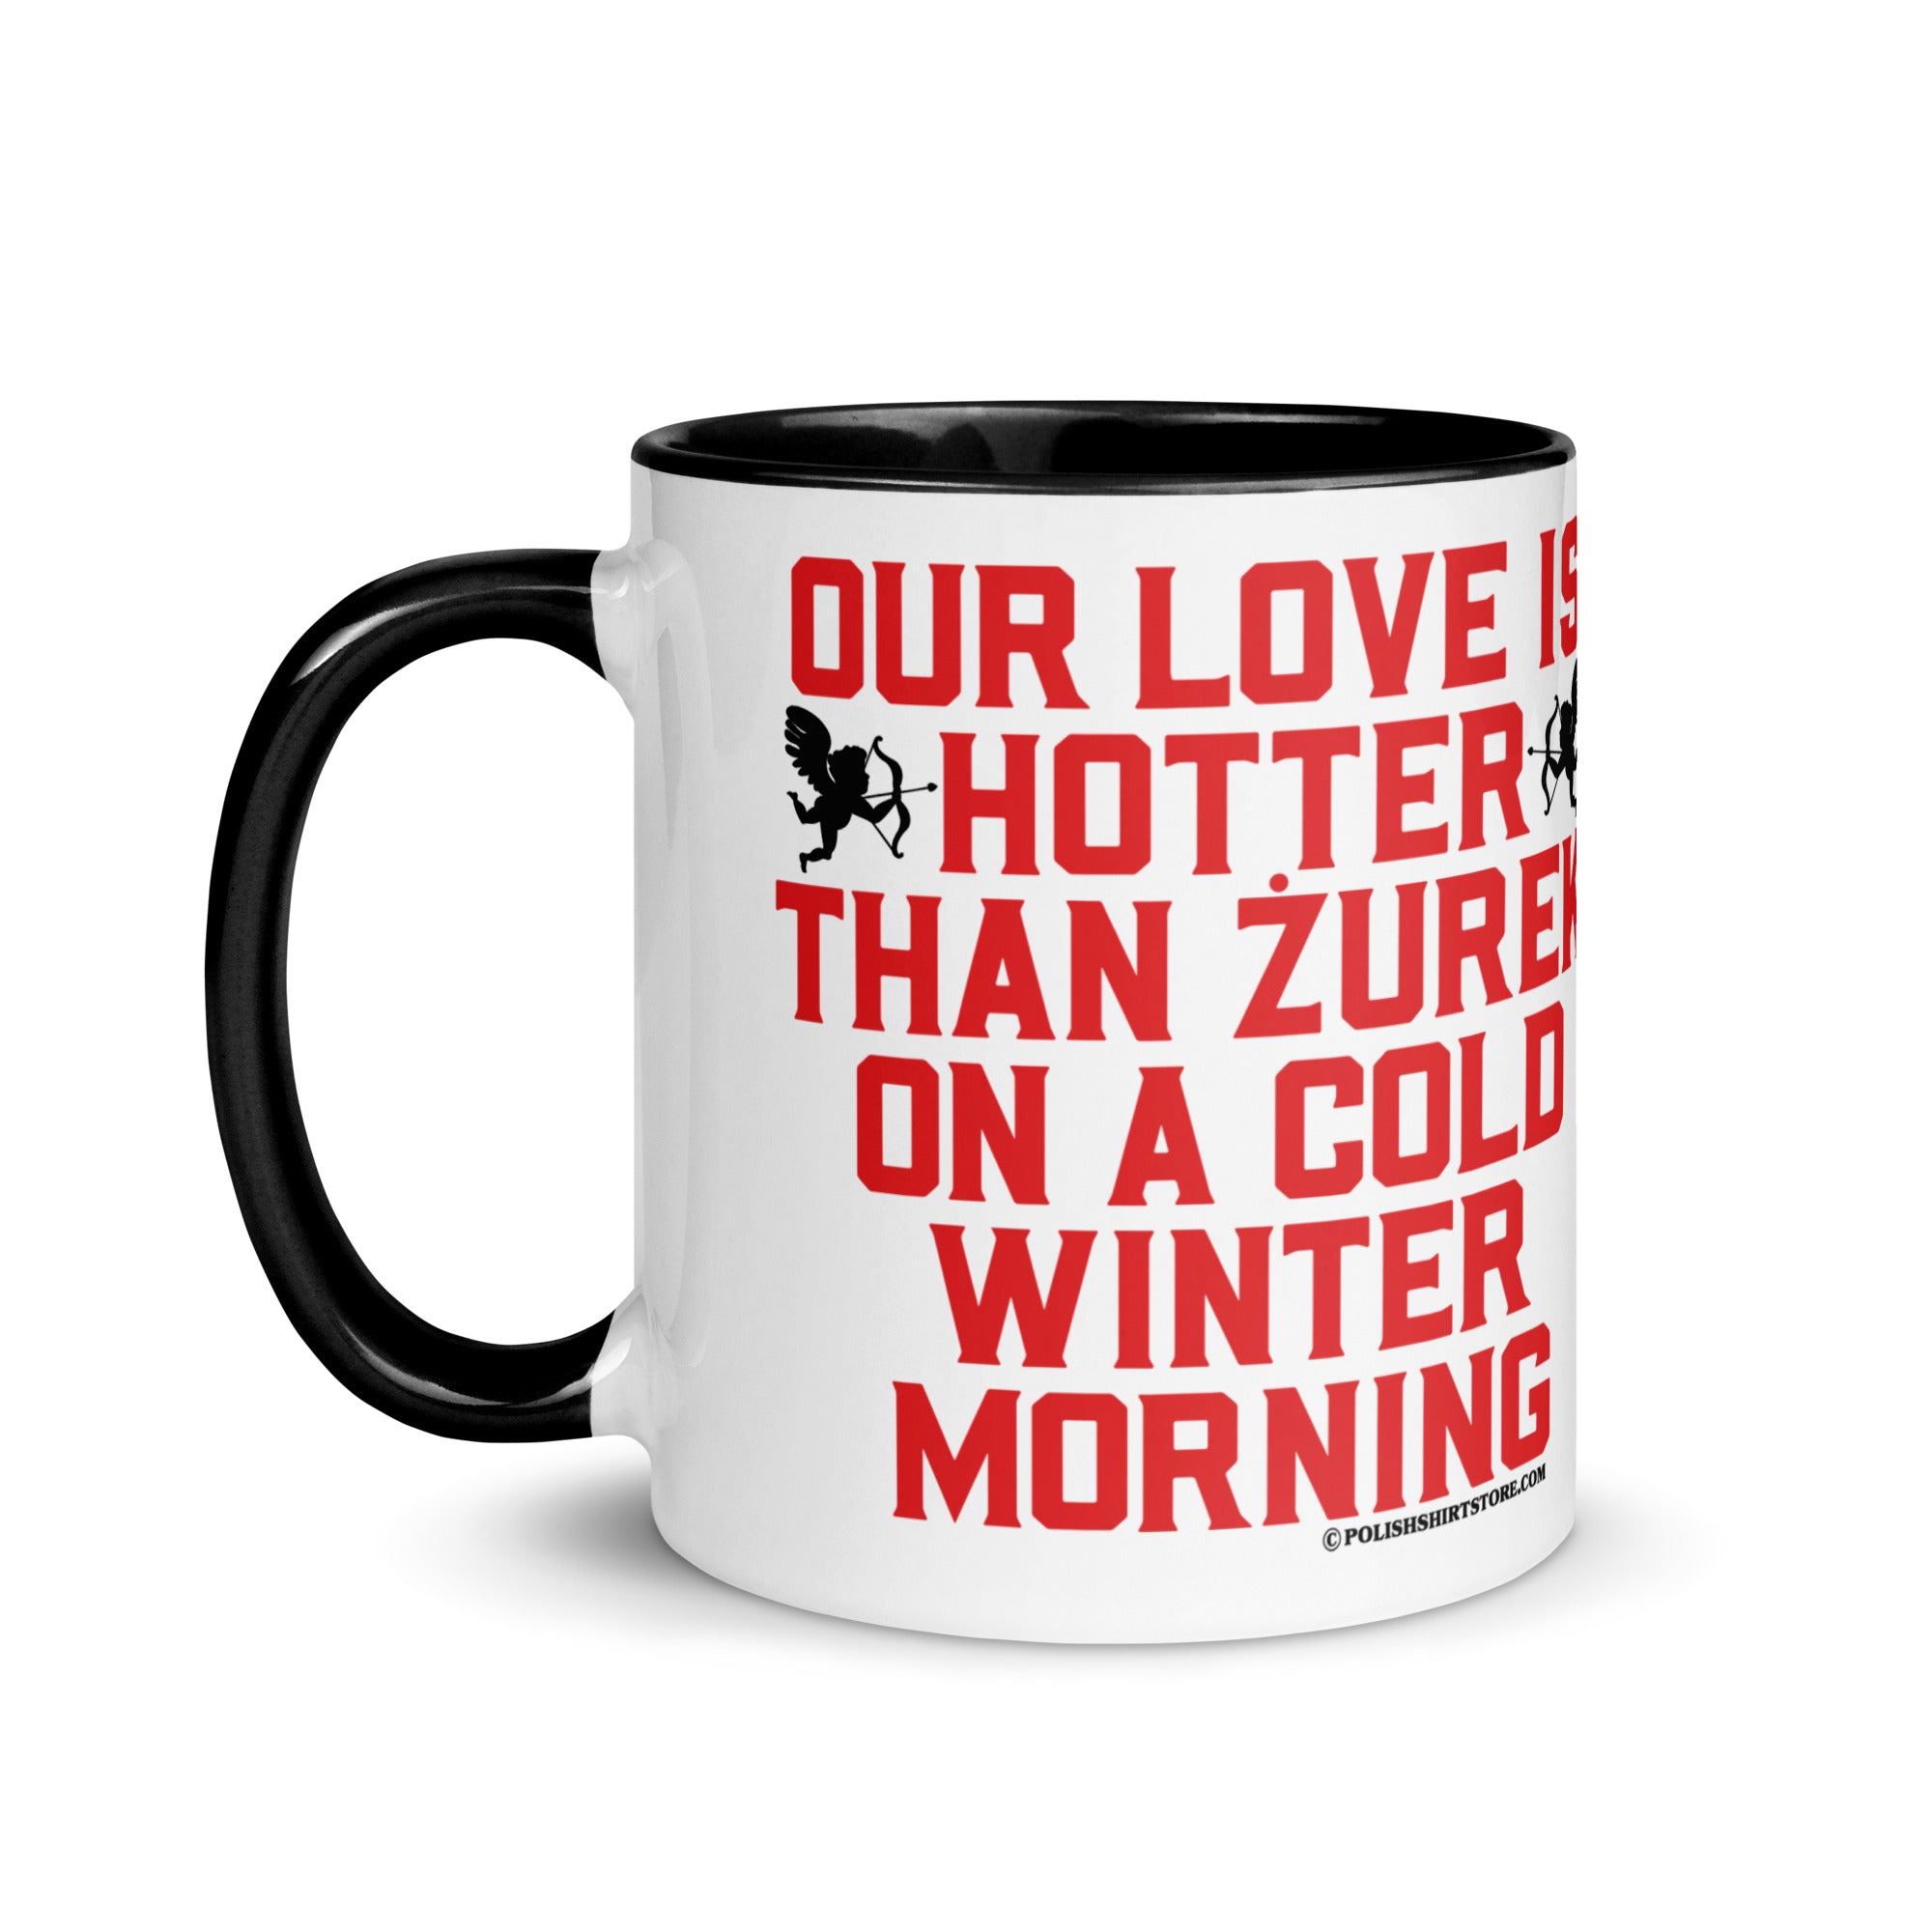 Our Love Is Hotter Than Zurek On A Cold Winter Morning Coffee Mug with Color Inside  Polish Shirt Store   